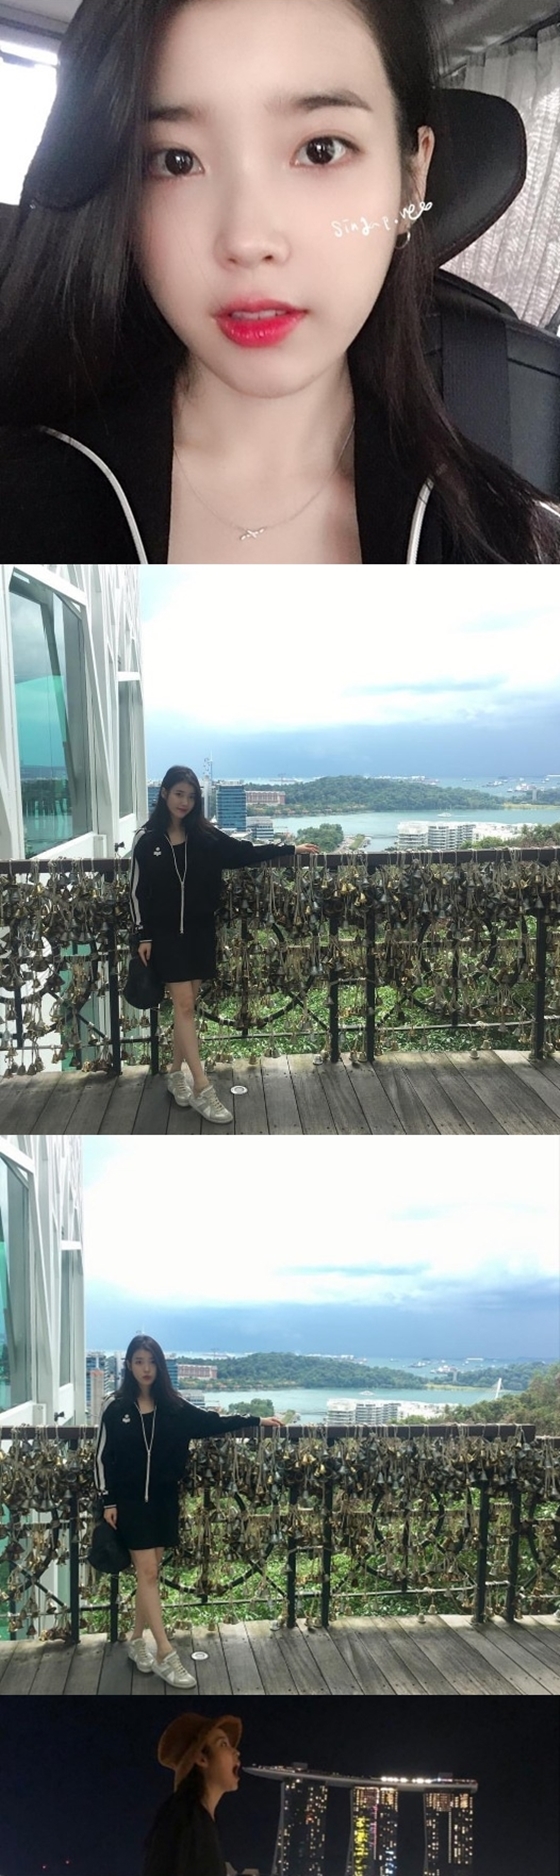 On the 14th, IU posted several photos on his Instagram with an article called Singasinga.The IU in the picture was a stay in Singapore, collecting Sight with a pure and lovely charm.Netizens responded in various ways such as Do everything beautiful and cute alone, I want to do it at the concert soon, I am beautiful today.Meanwhile, IU received the Star Pay Popular Award, Asia Hot Tist Award, and Artist of the Year Award at the 2018 Asia Artist Awards held at Incheon Namdong Gymnasium on the 28th of last month.Im on.